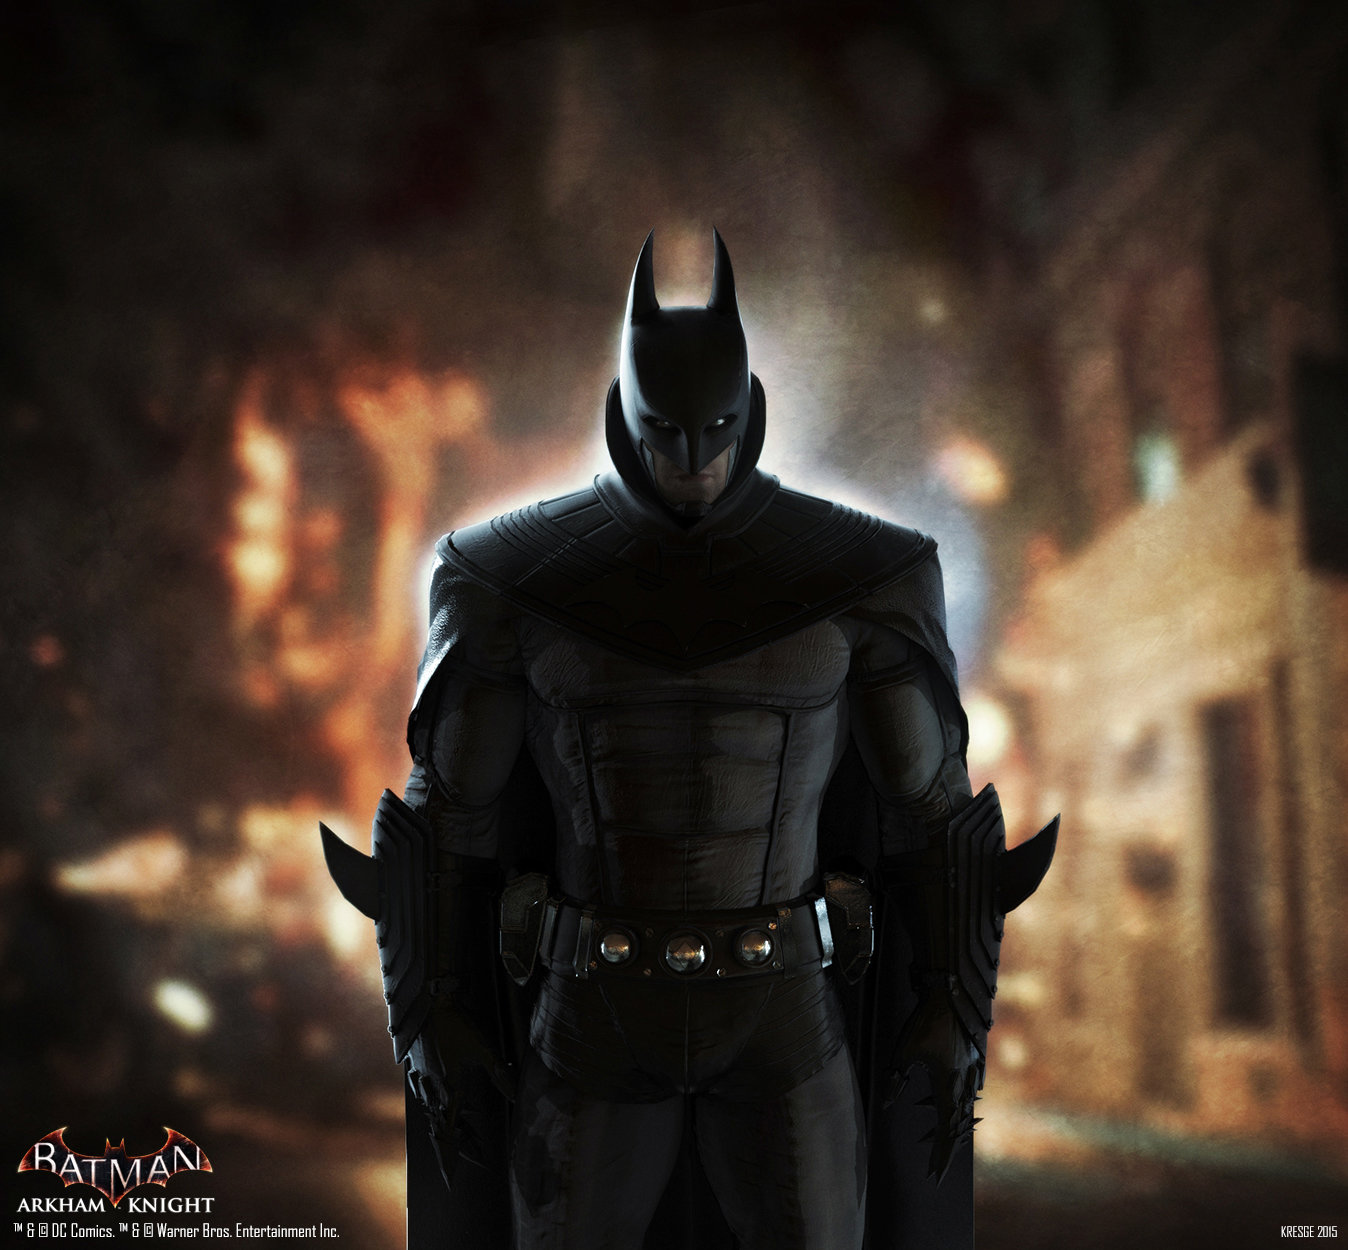 Toonami DC FanDome: Batman Gotham Knight Trailer - Saturday | Some heroes  do wear capes, but only one can conquer the darkness of Gotham. In honor of  DC FanDome happening this Saturday,